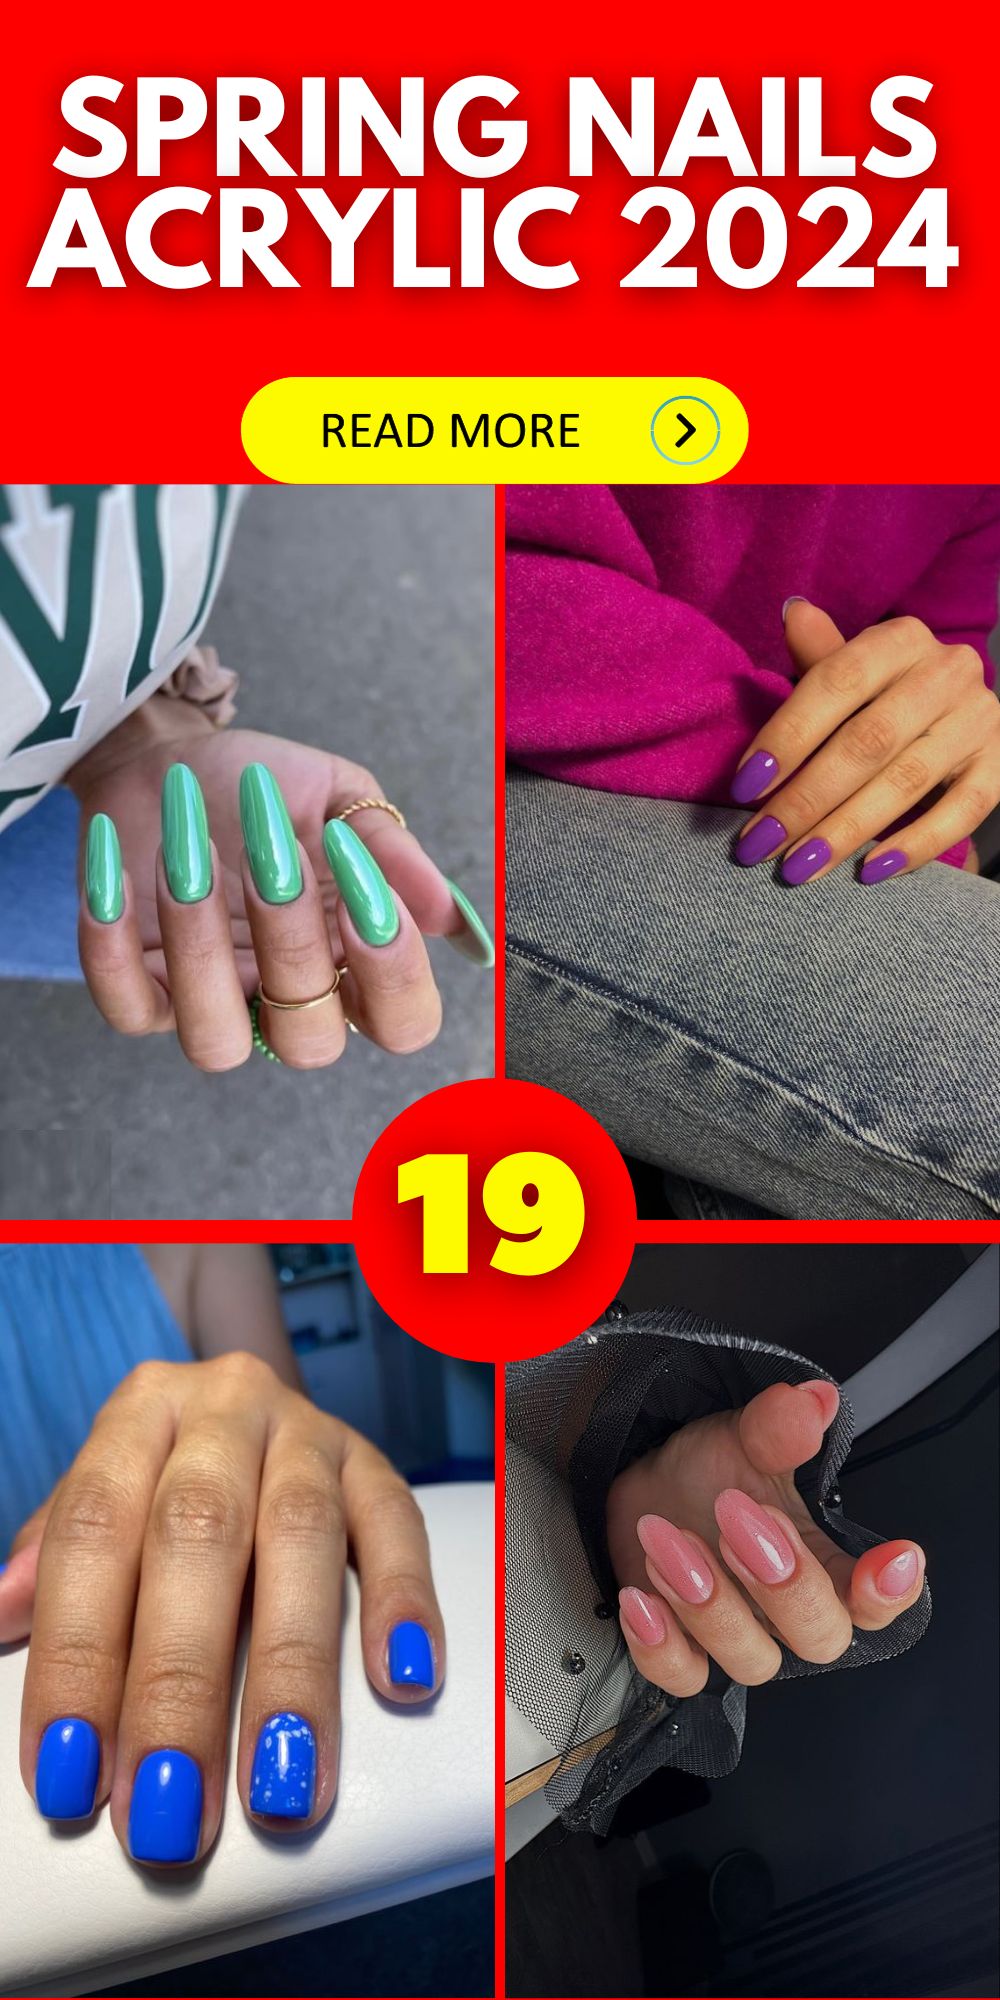 Explore Cute & Trendy Acrylic Nails for Spring 2024 - Get Inspired!